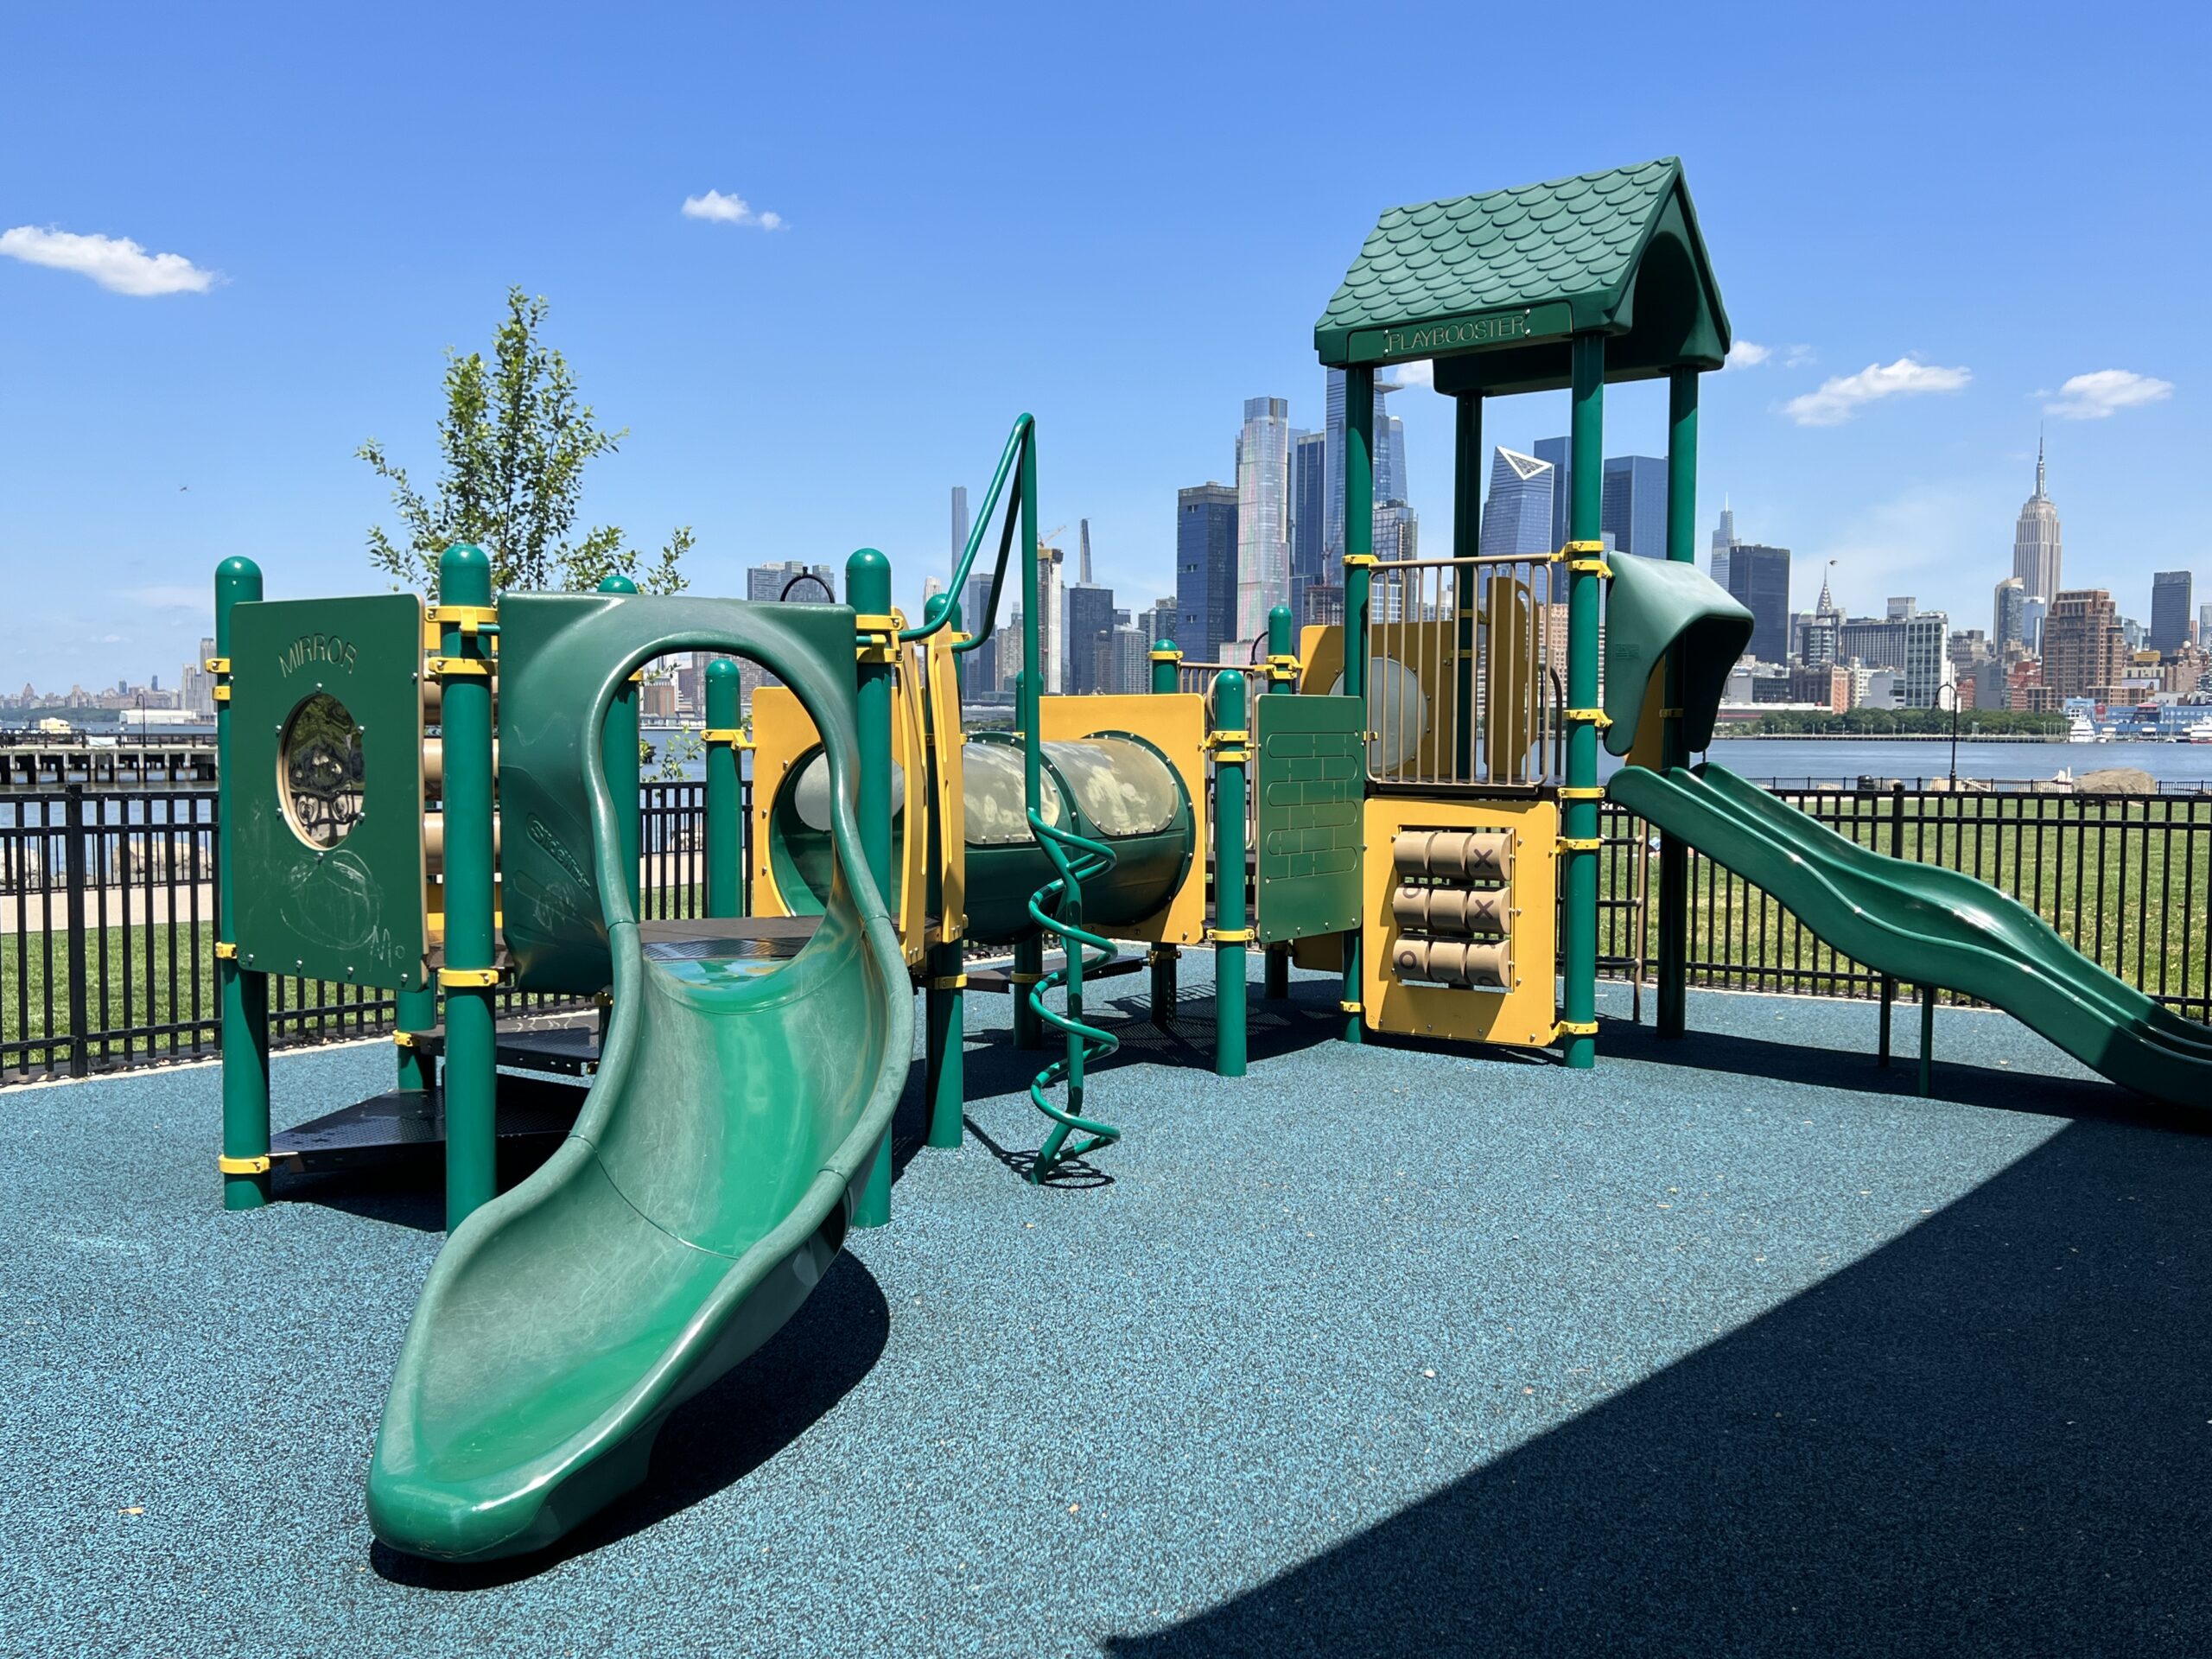 Maxwell Place Park Playground in Hoboken NJ - WIDE image - second playground with SLIDES, tunnel, and other features